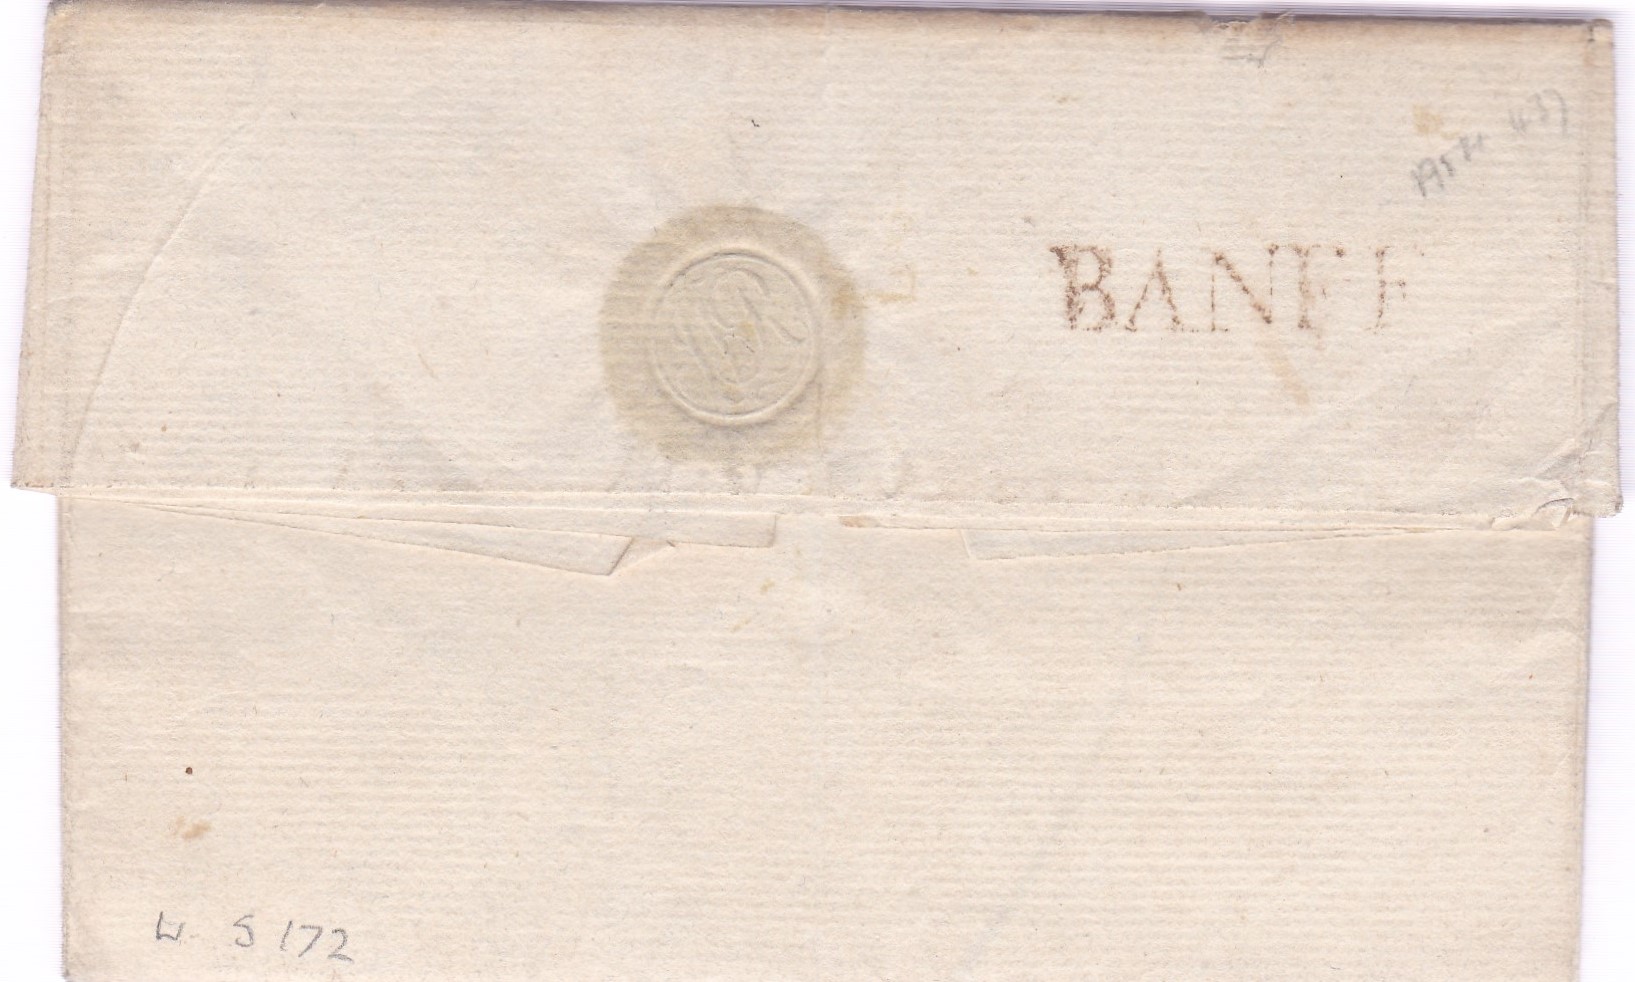 Scotland 1794 - EL Baniff to Bank Office Huntley with SL BANFF on the reverse - Image 2 of 2